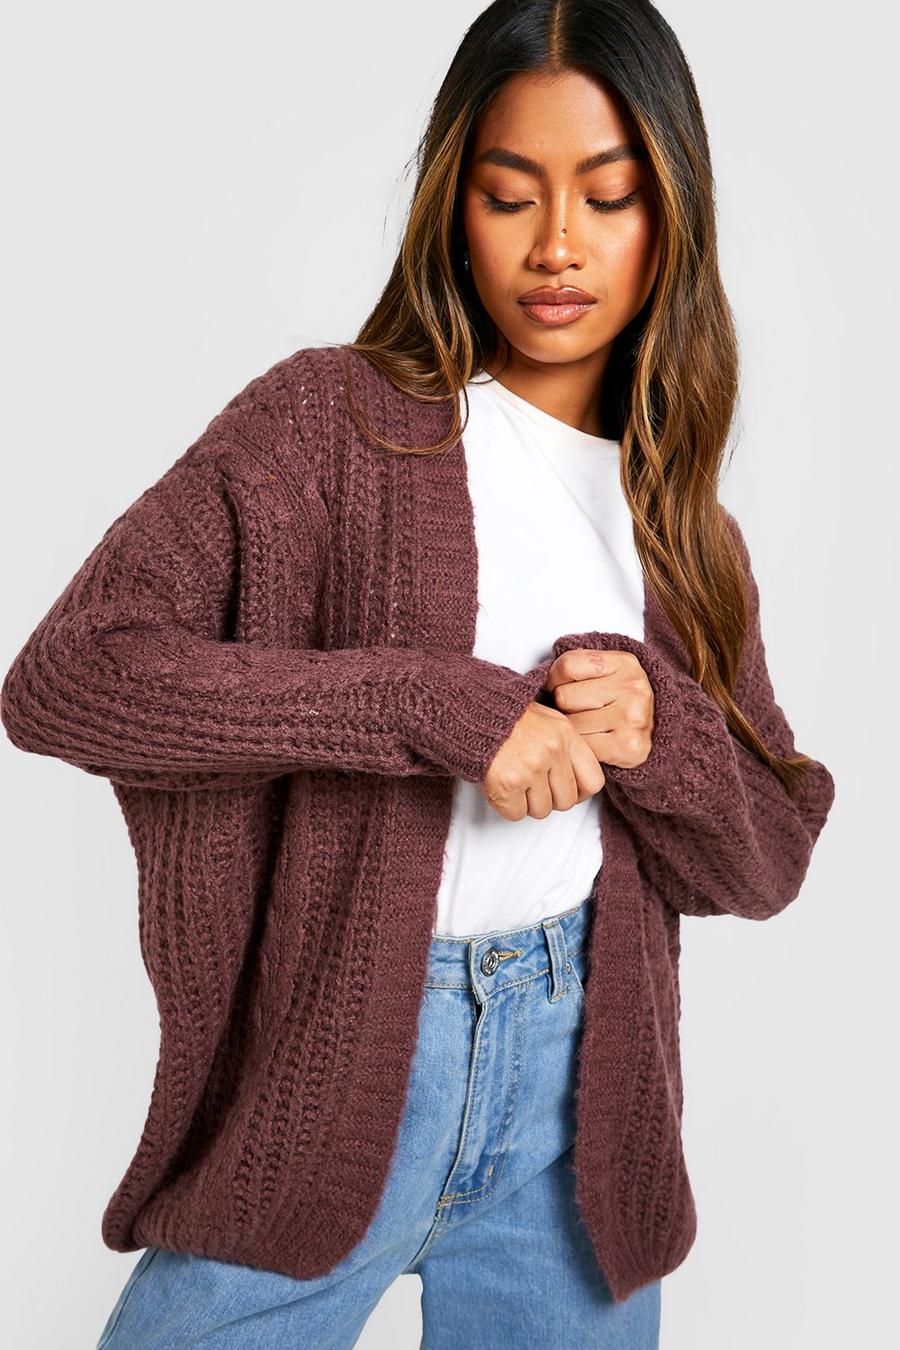 Taupe beige Soft Brushed Knit Cable Knit Boyfriend Cardigan